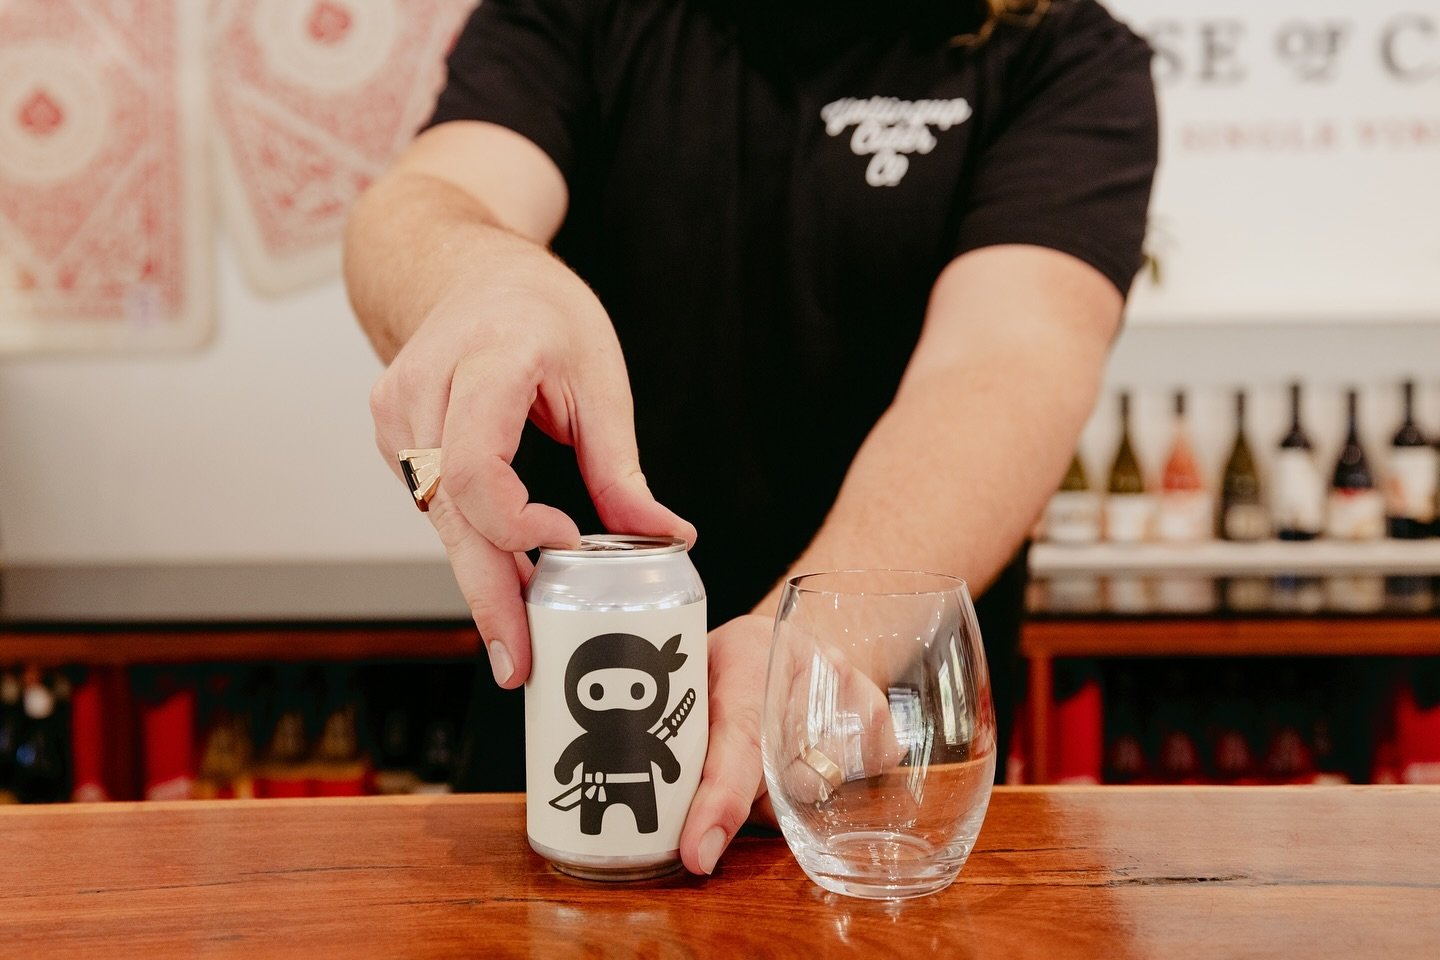 Crack open and sneaky one at @houseofcardswine or pop a bottle of Heritage Pet Nat cider 🍏&thinsp;
&thinsp;
&thinsp;
&thinsp;&thinsp;
...have a sneaky one 🥷 🍻 &thinsp;&thinsp;
&thinsp;&thinsp;
&thinsp;&thinsp;📷 @biancakatephotography 
&thinsp;&th